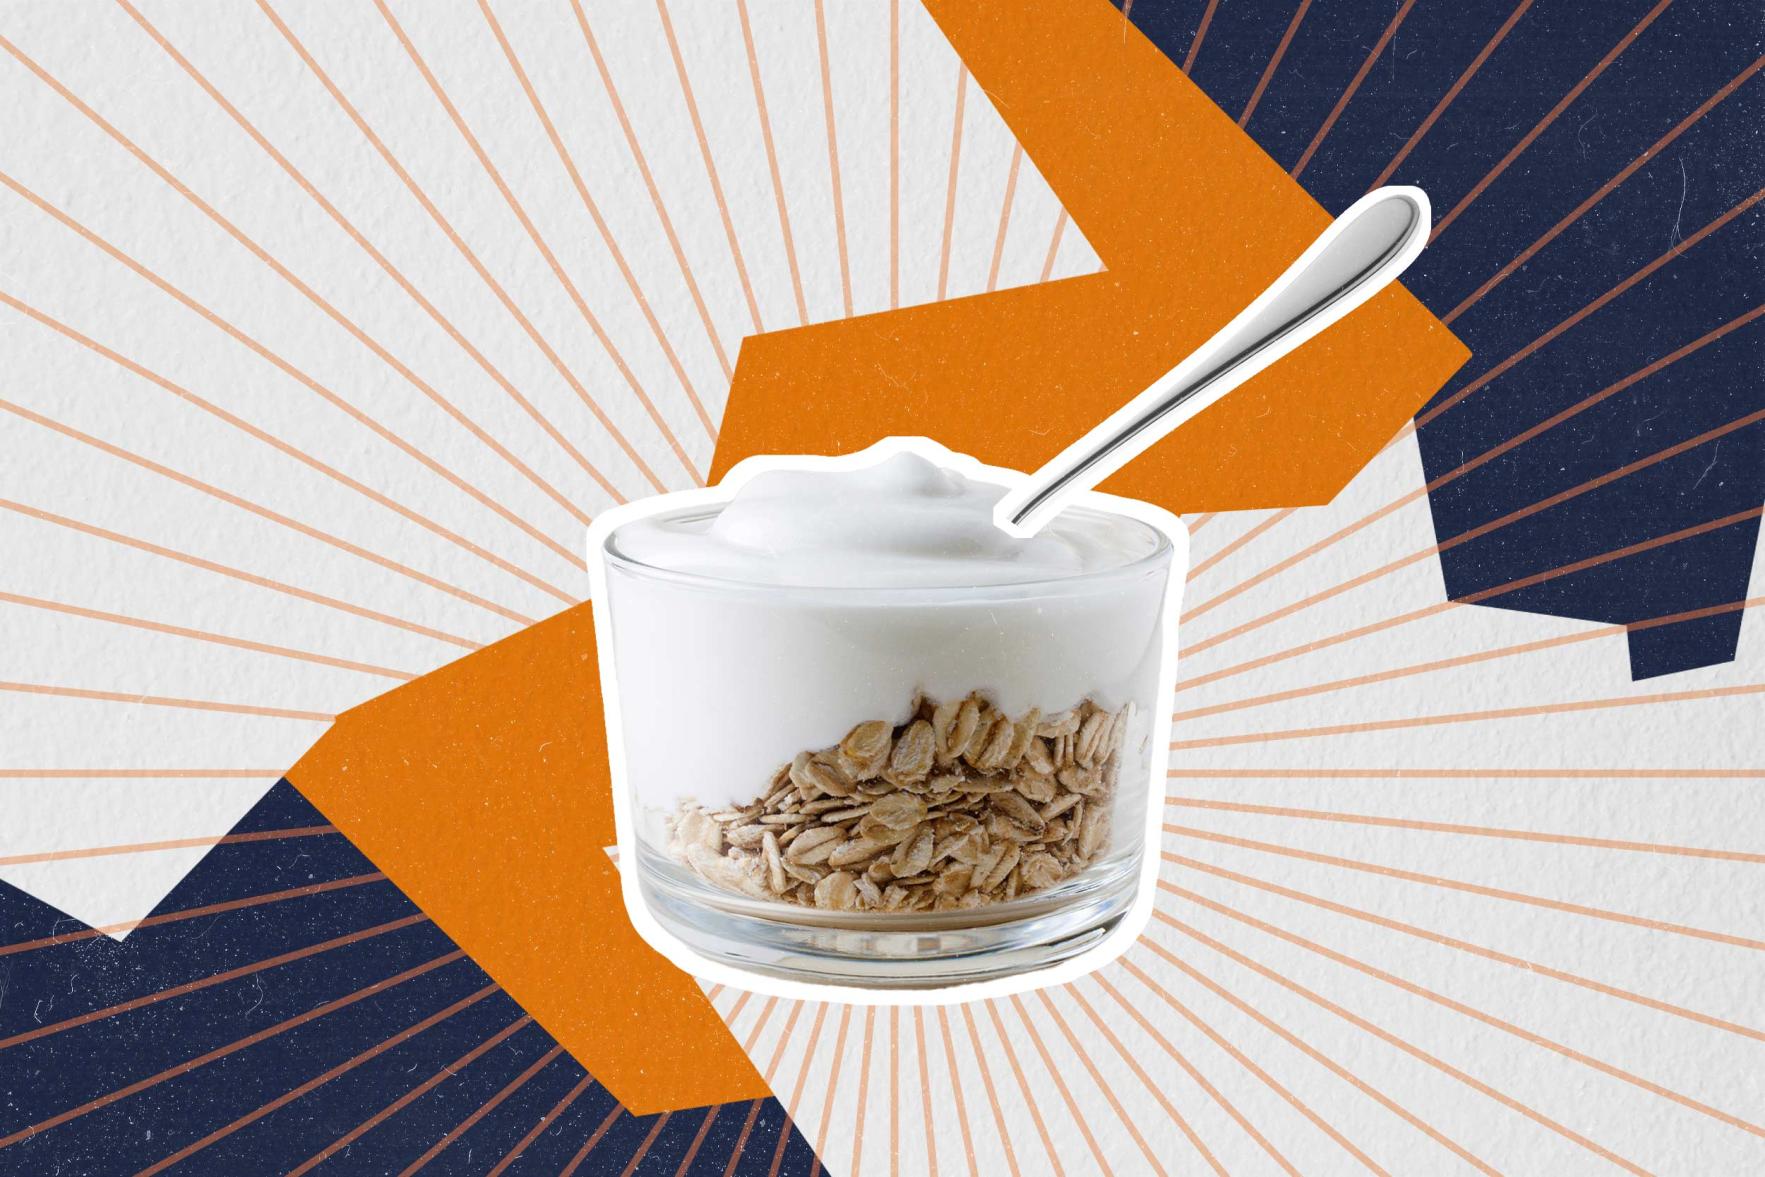 A cup of granola and yogurt on a fragmented background of orange, tan, and blue 